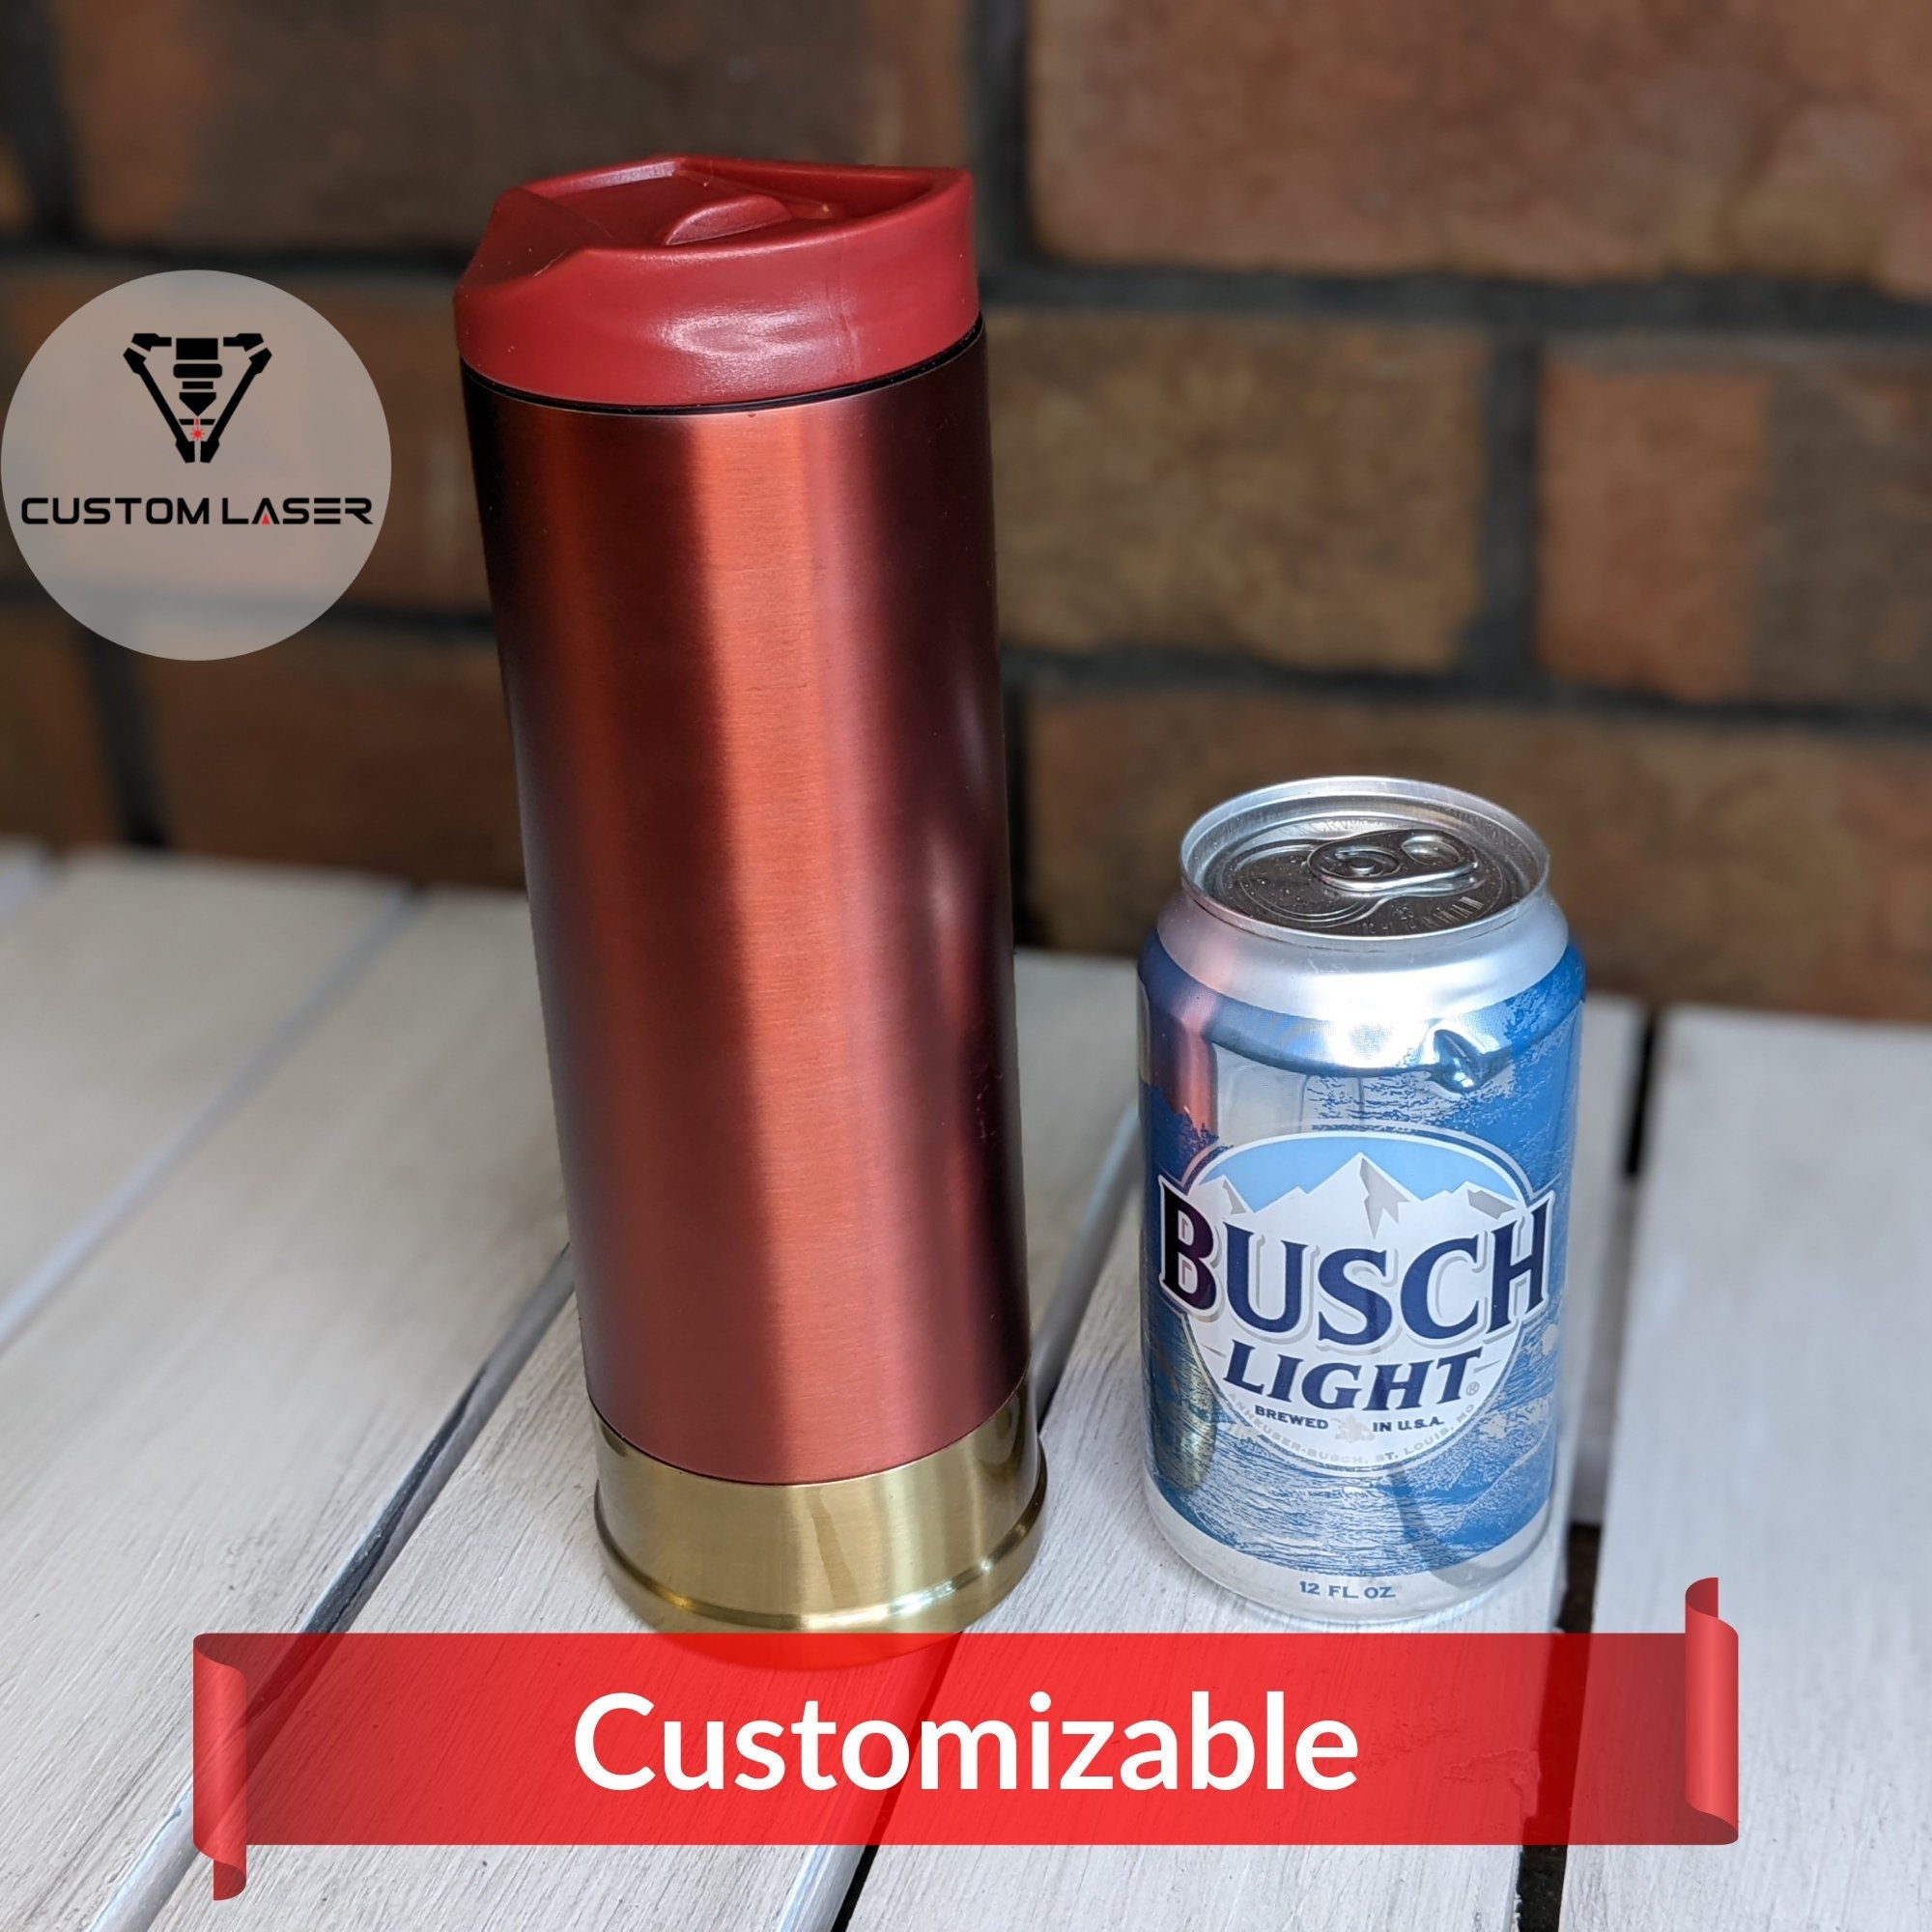 Shotgun Shell Style Stainless Steel 33.8 oz. (1L) Vacuum Bottle Thermos -  BF-THERMOSGUN - IdeaStage Promotional Products